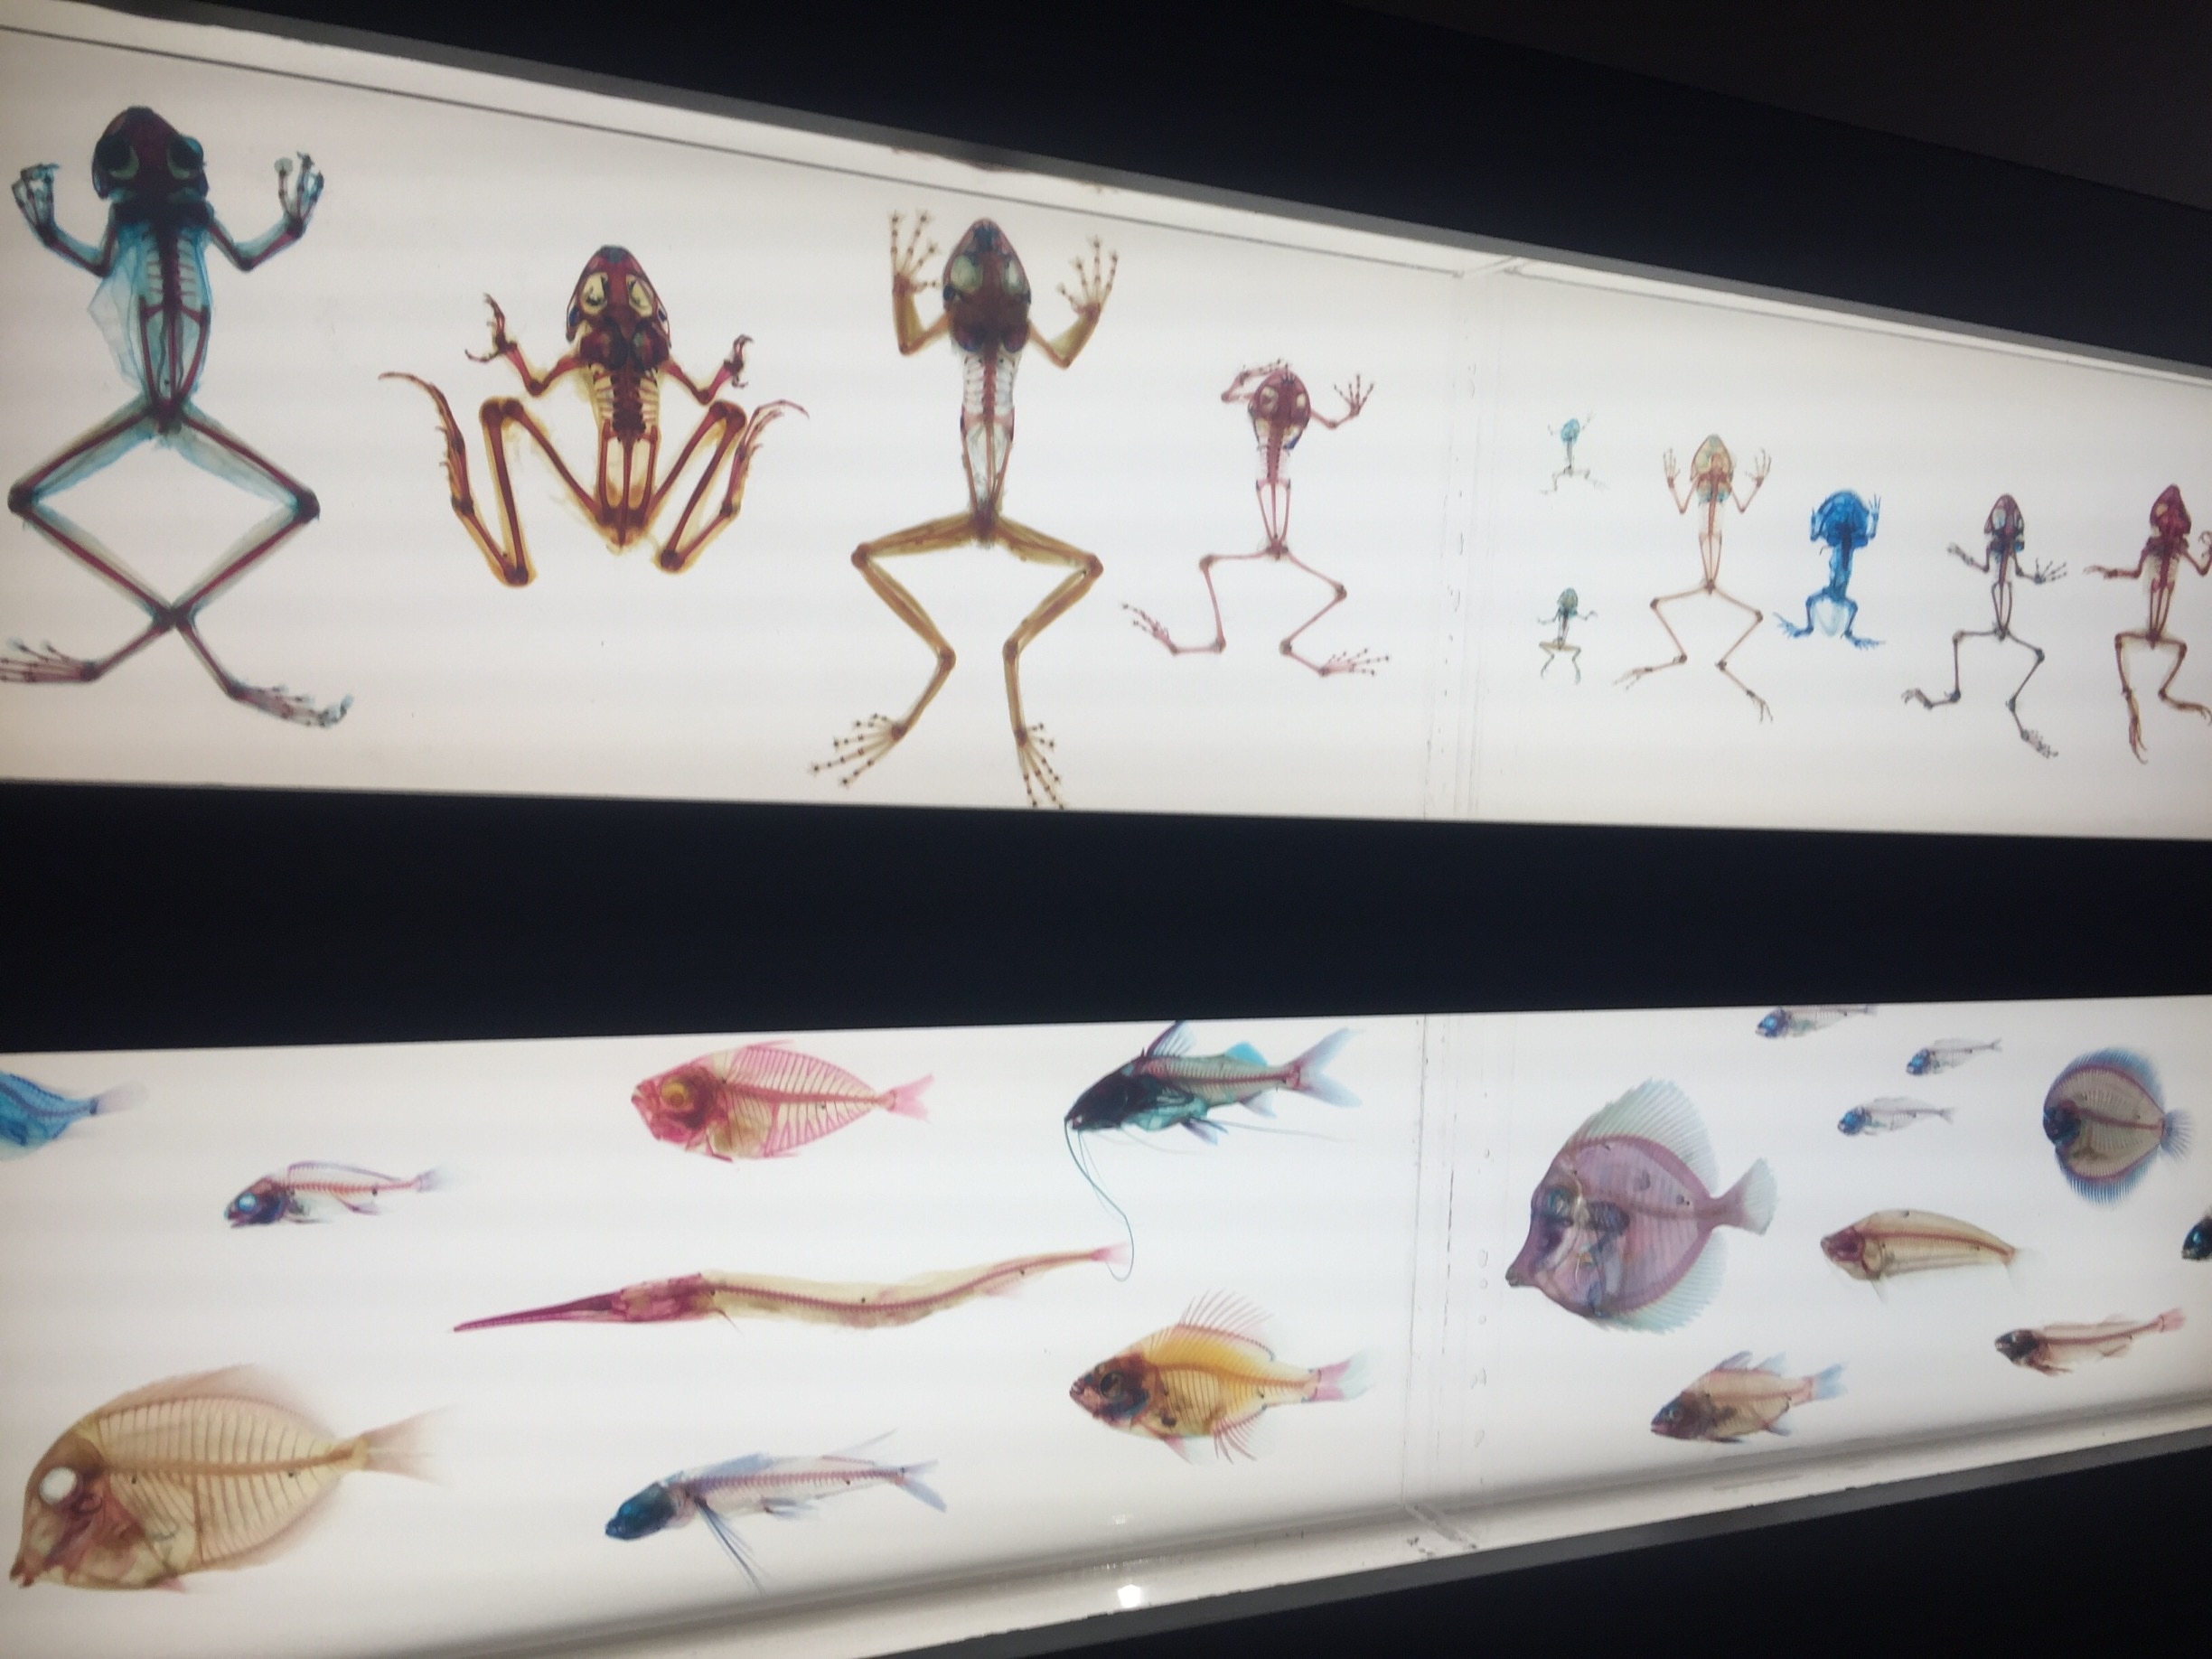 More of the cleared and stained exhibit. It's tucked away on the far south side of the top floor past all the case displays. Probably my new favorite thing in the museum. 